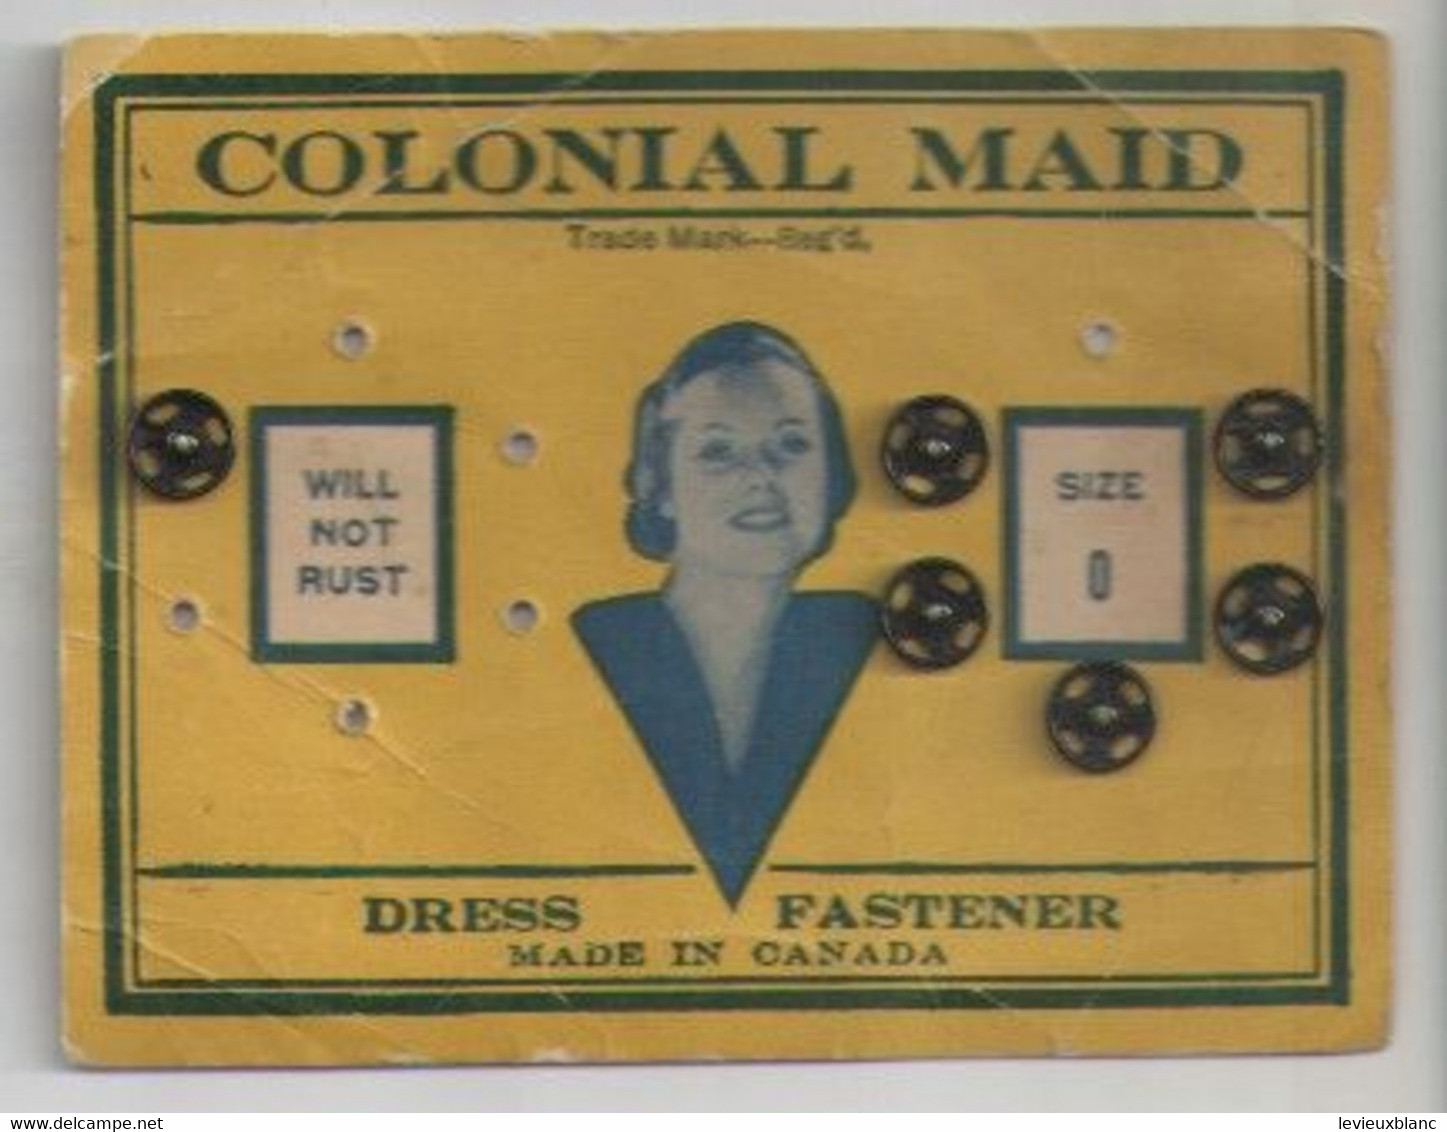 Mercerie / Boutons Pressions/Colonial Maid /Dress Fastener/Made In Canada /Carton De Présentation/Vers 1950-60     MER87 - Buttons